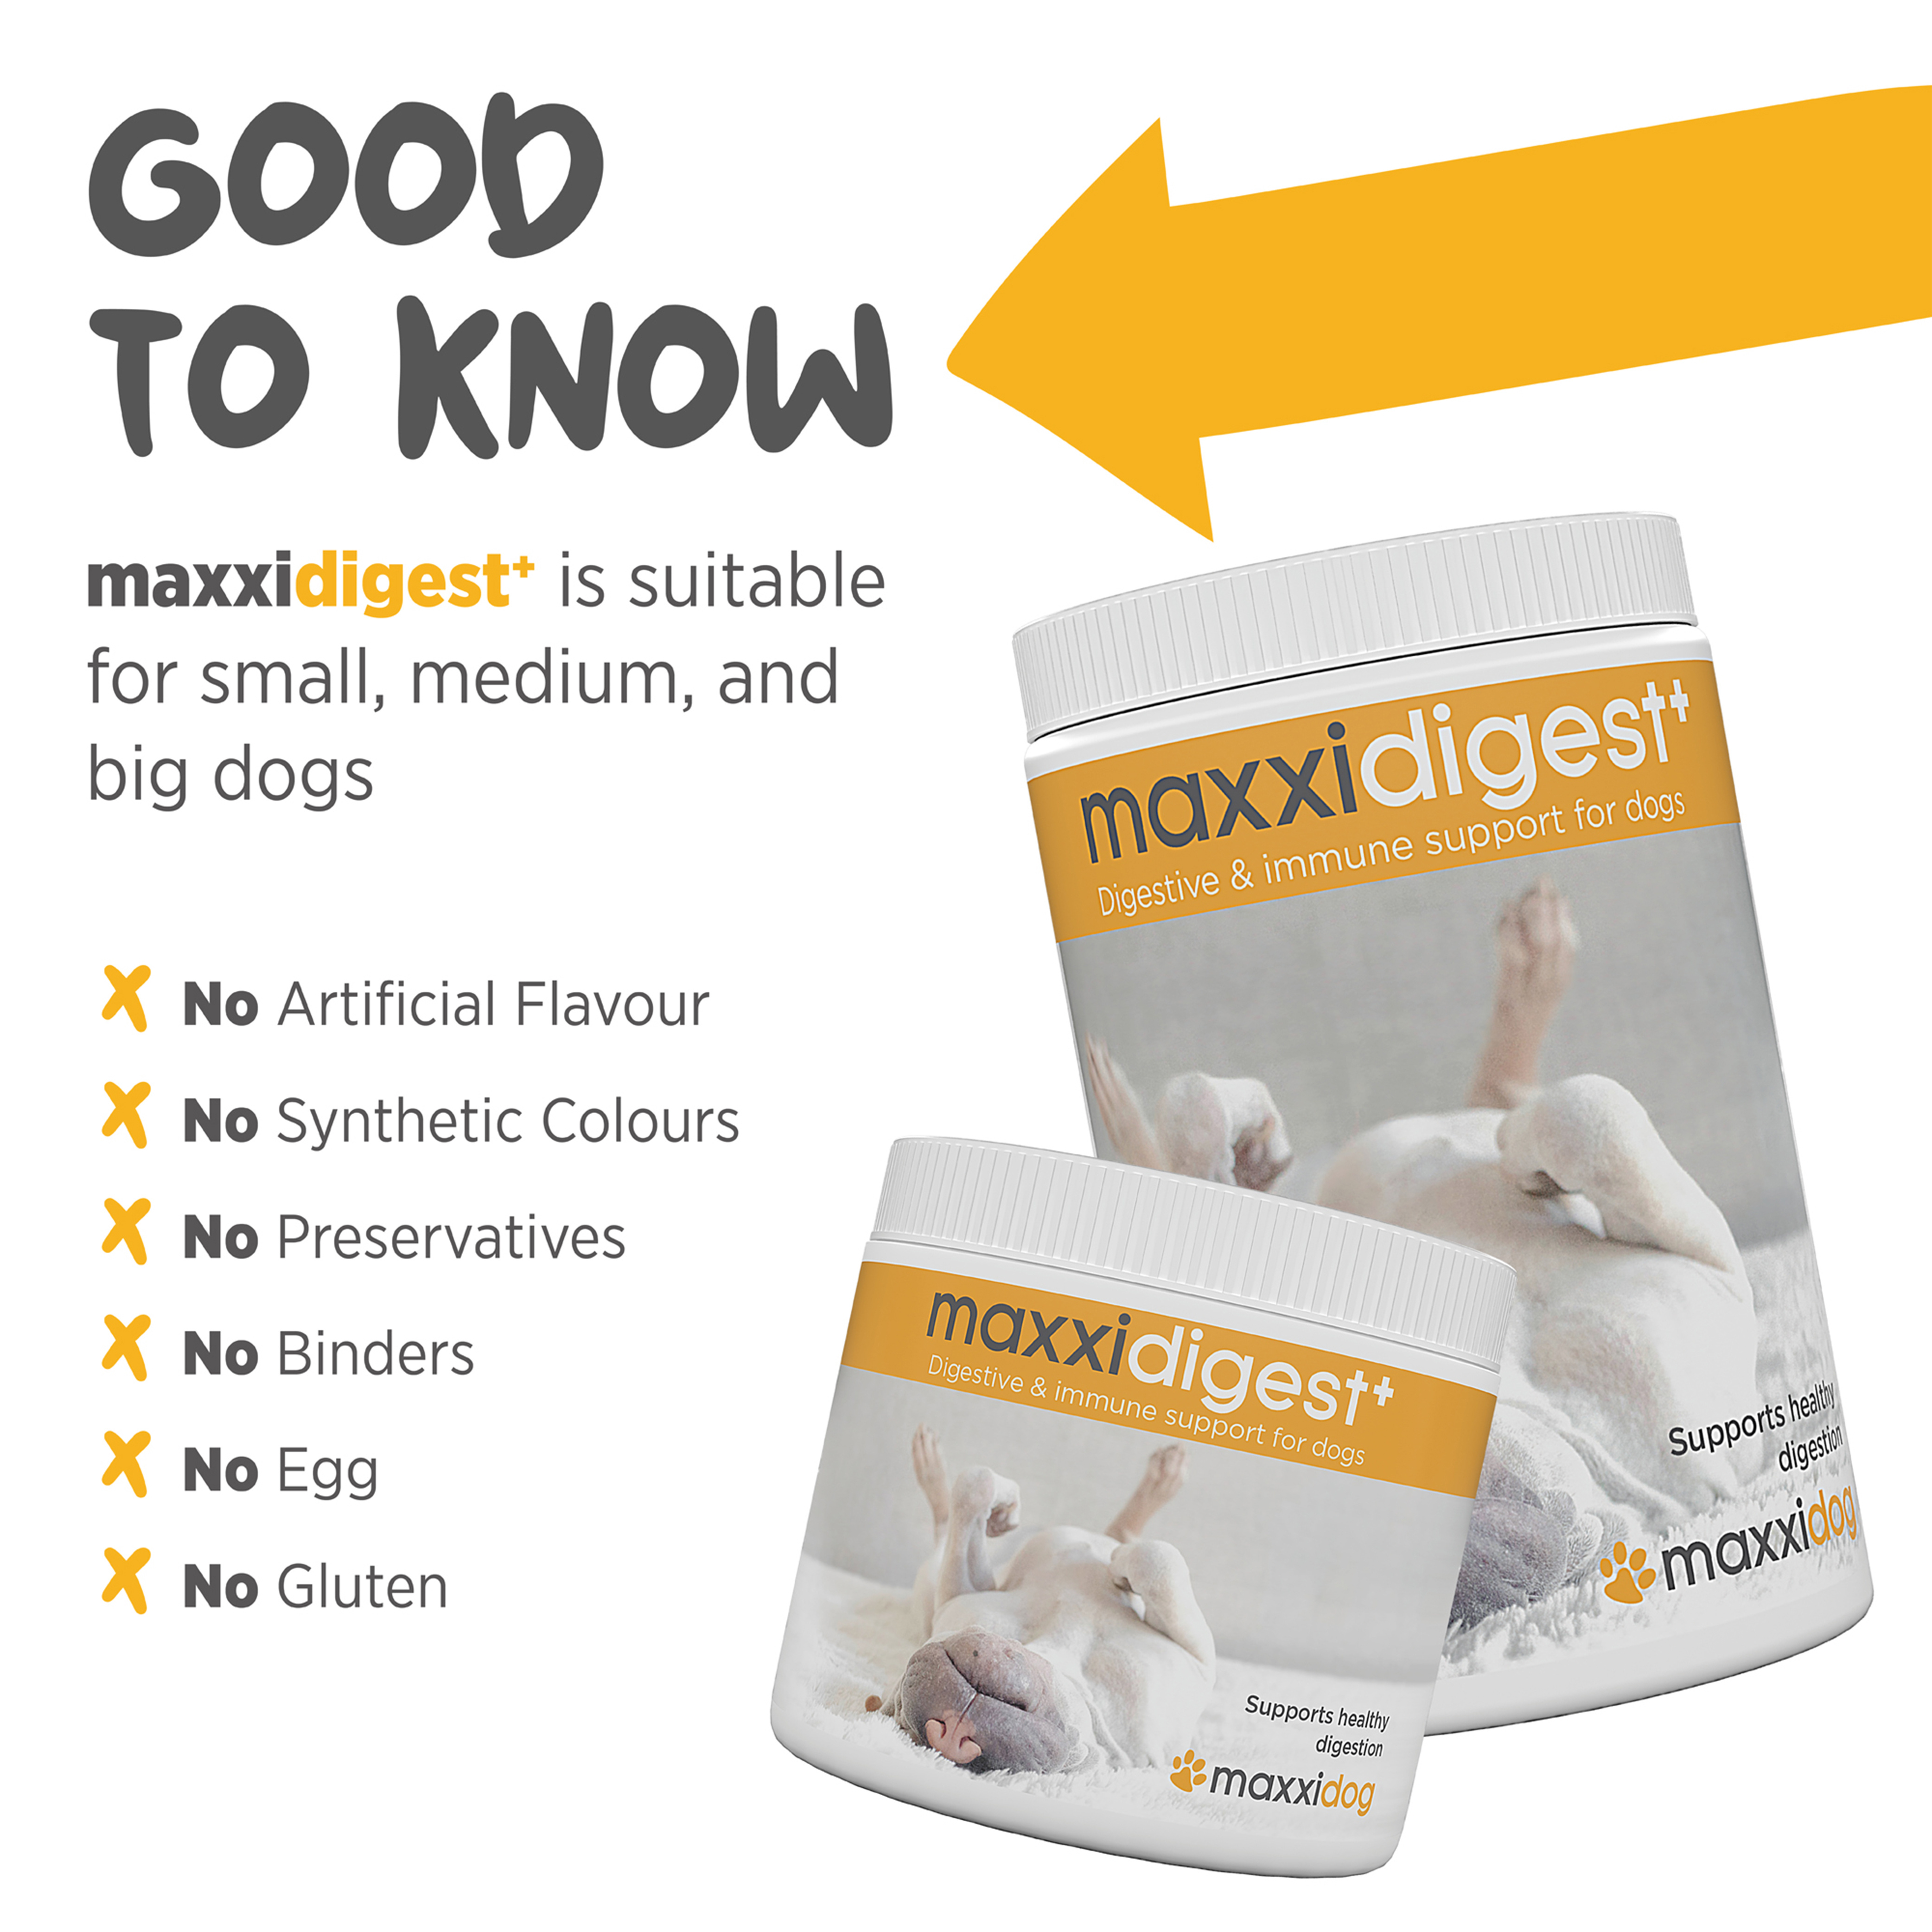 maxxidigest+ made in usa and contains no additives